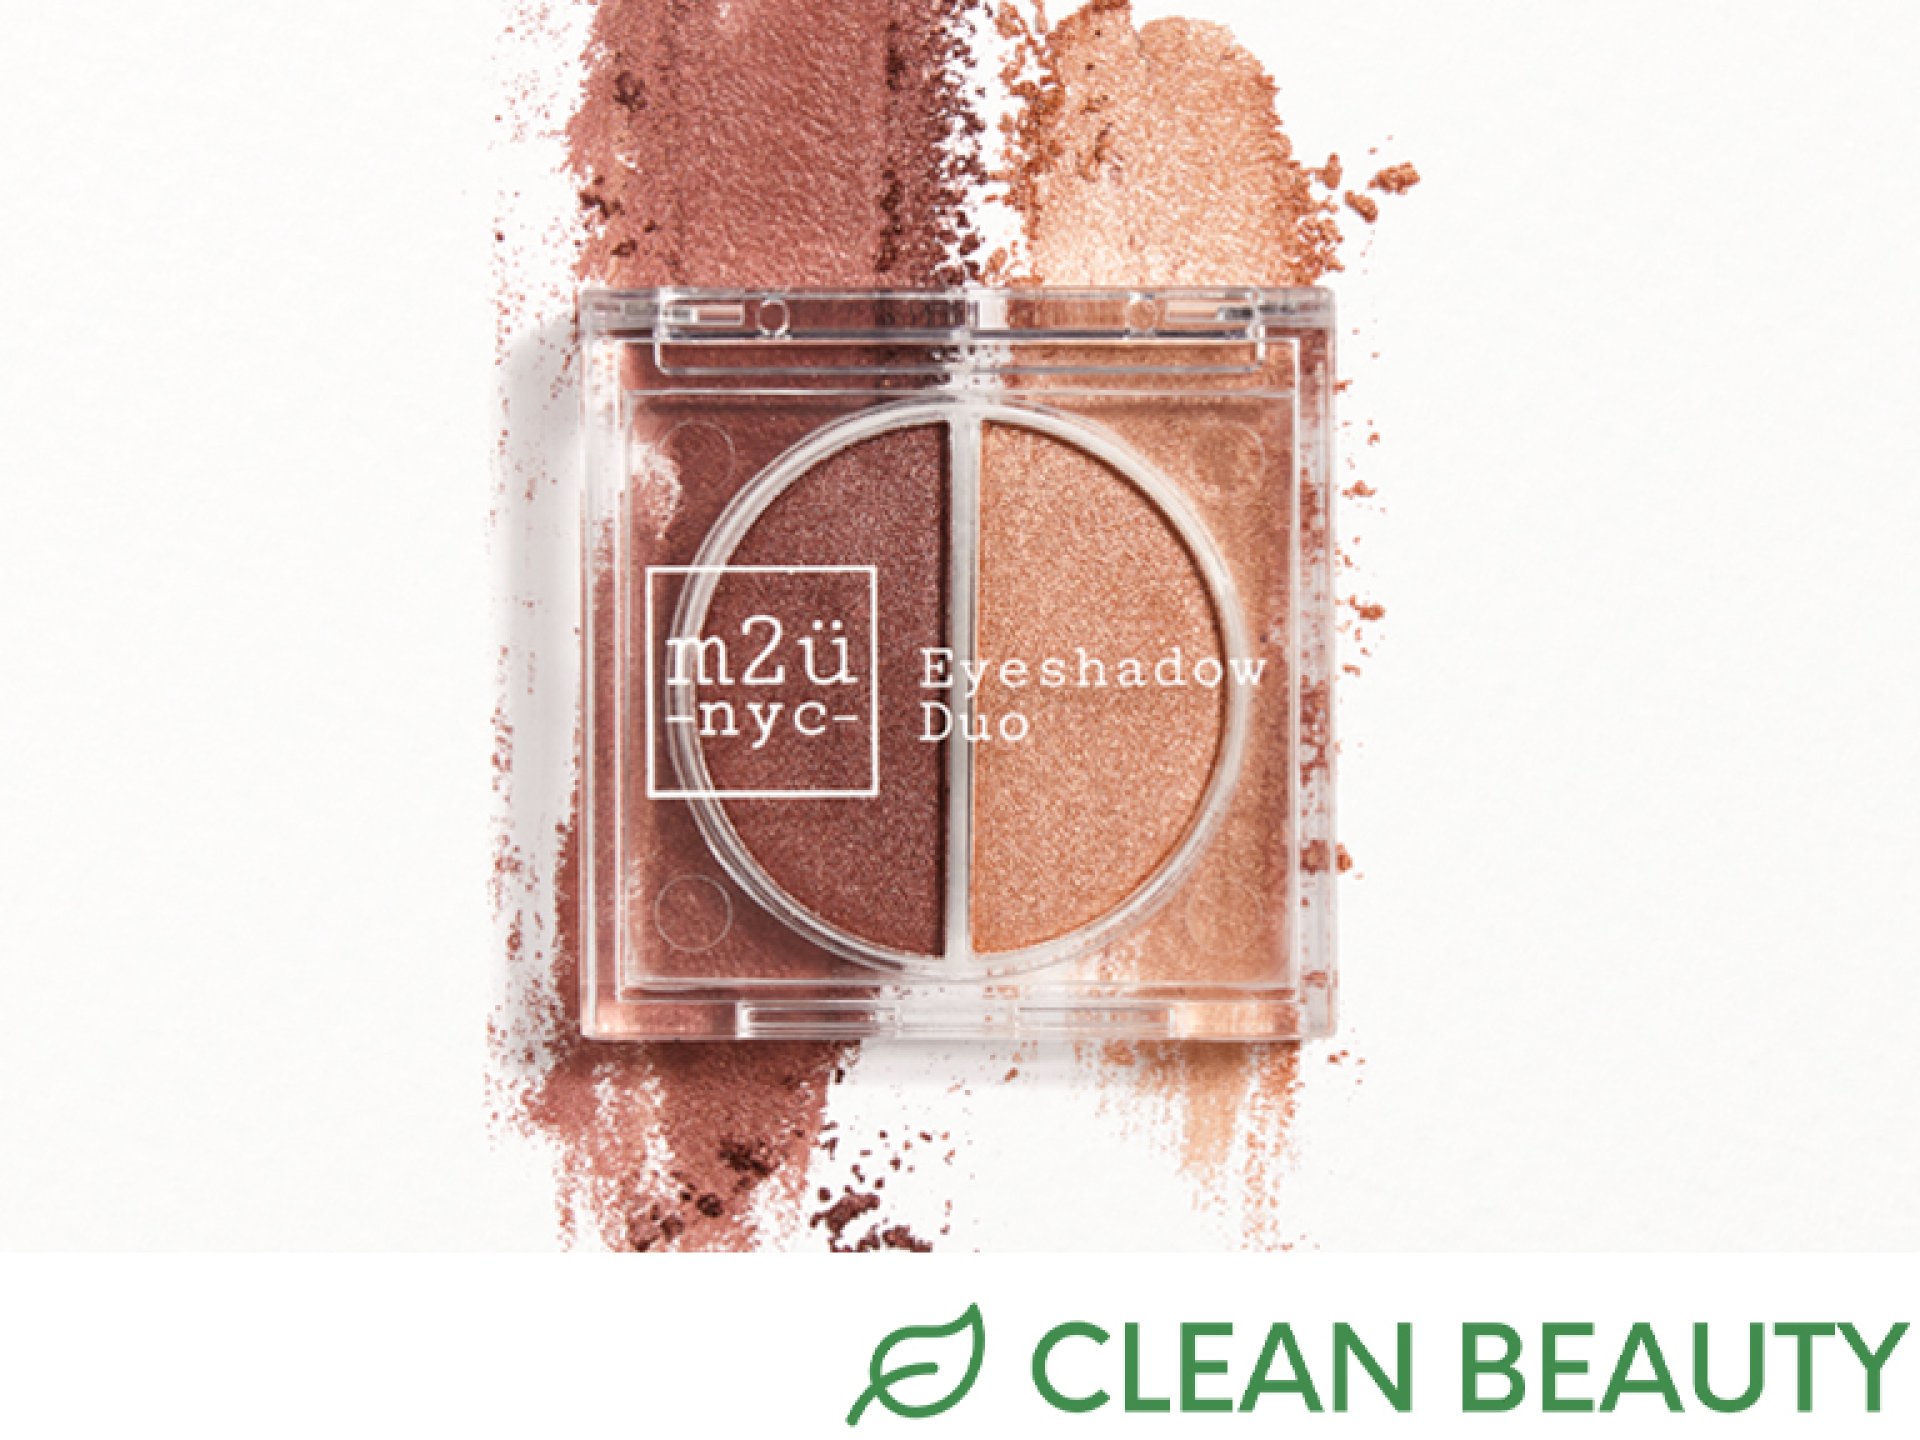 M2Ü NYC Eyeshadow Duo in Cobble Hill_Clean